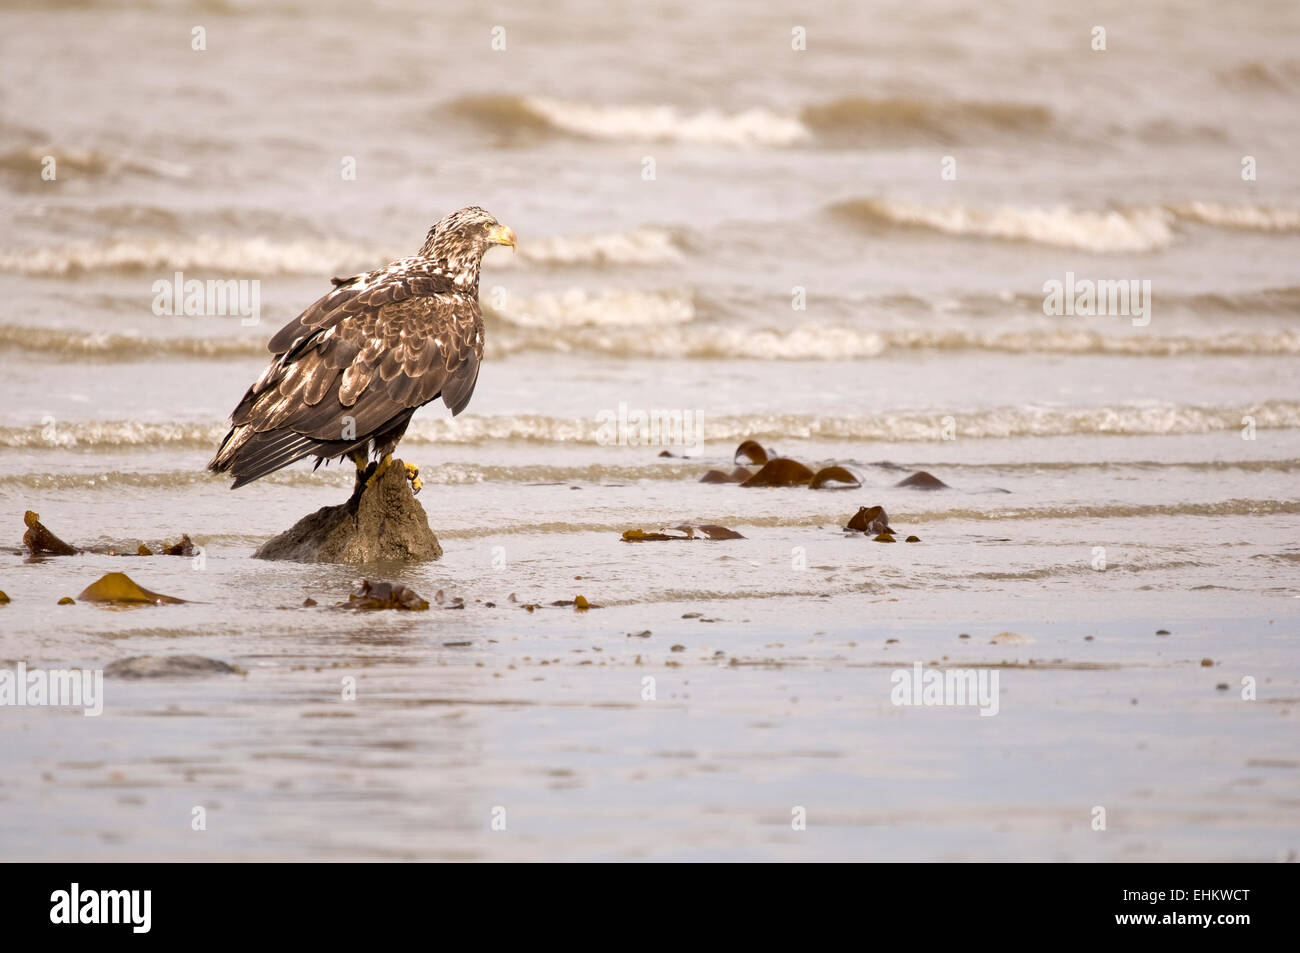 Young eagle resting on an Alaskan beach. Stock Photo